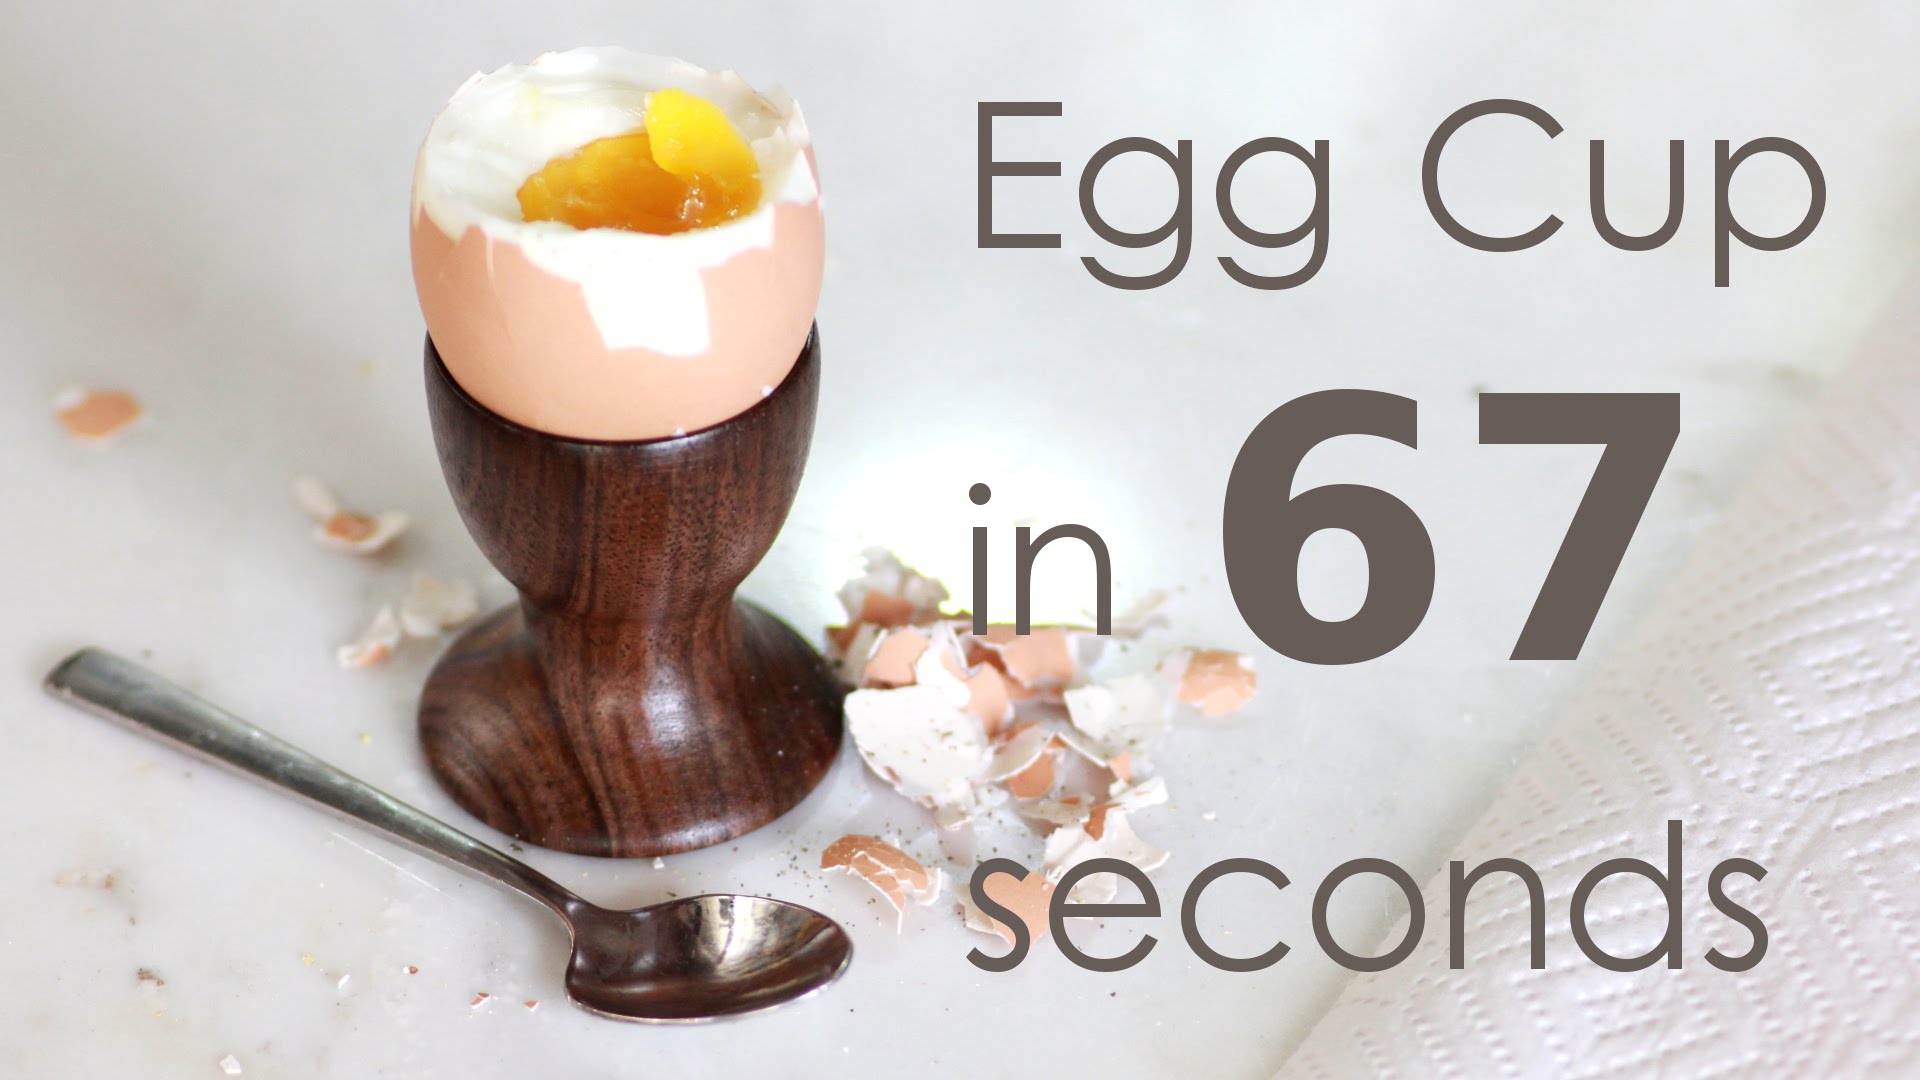 Making an Egg Cup - YouTube